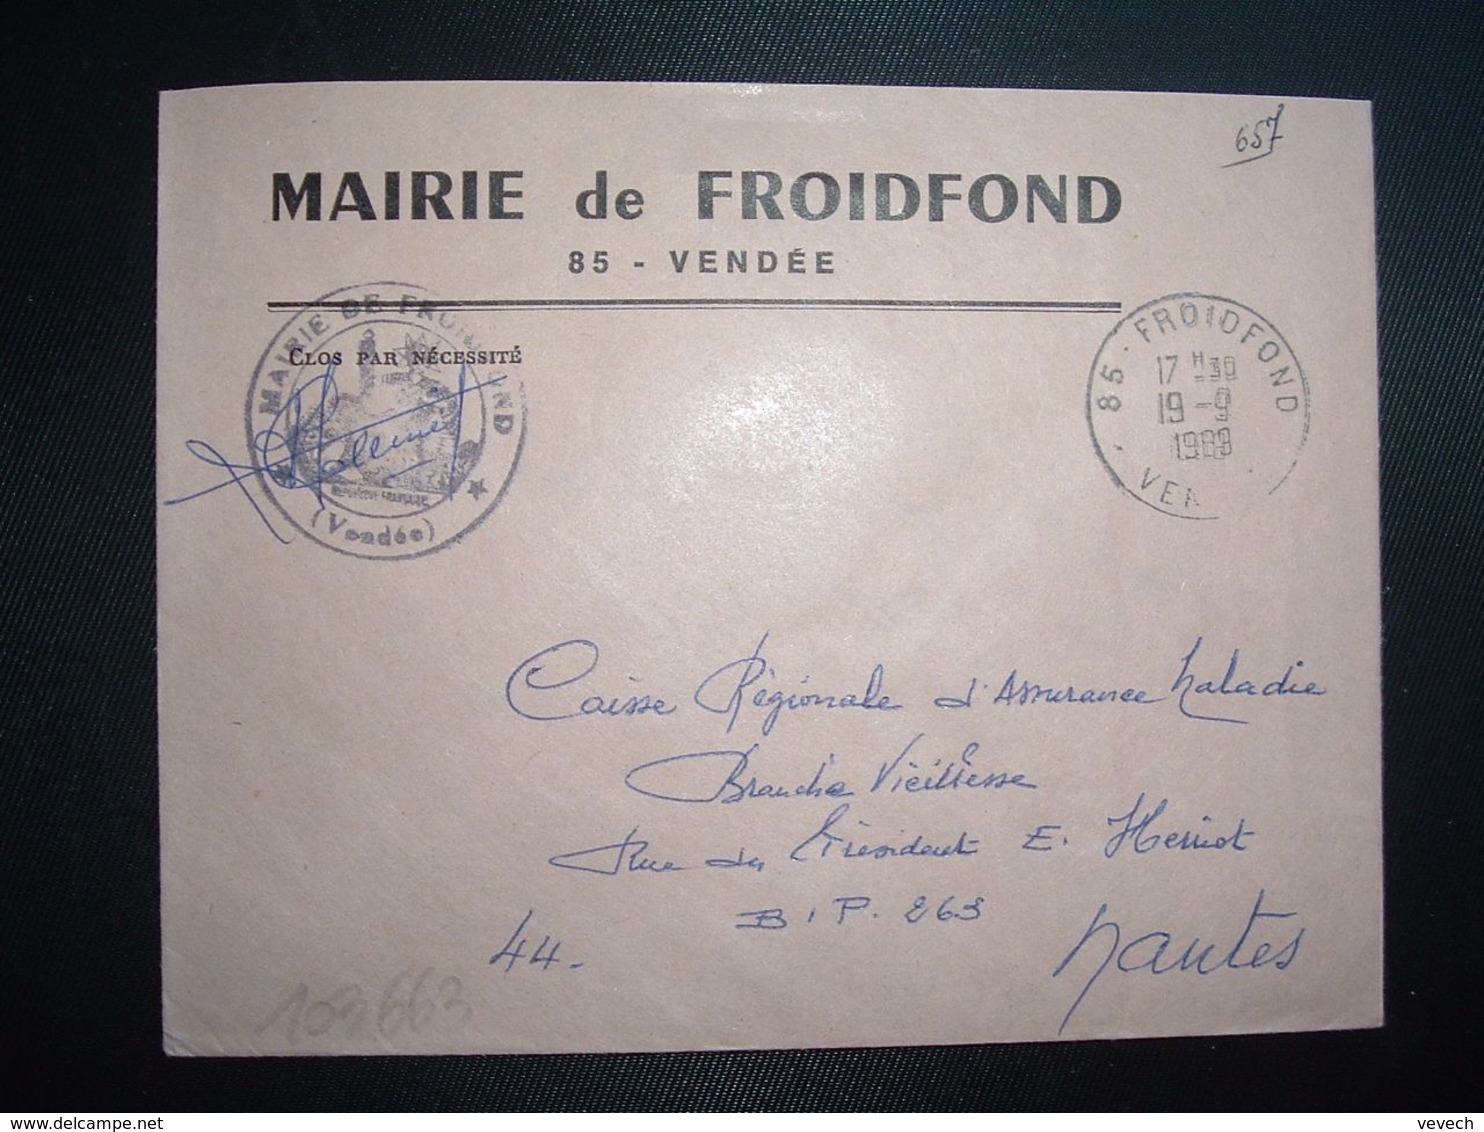 LETTRE MAIRIE OBL.19-9 1969 85 FROIDFOND VENDEE - Cachets Manuels